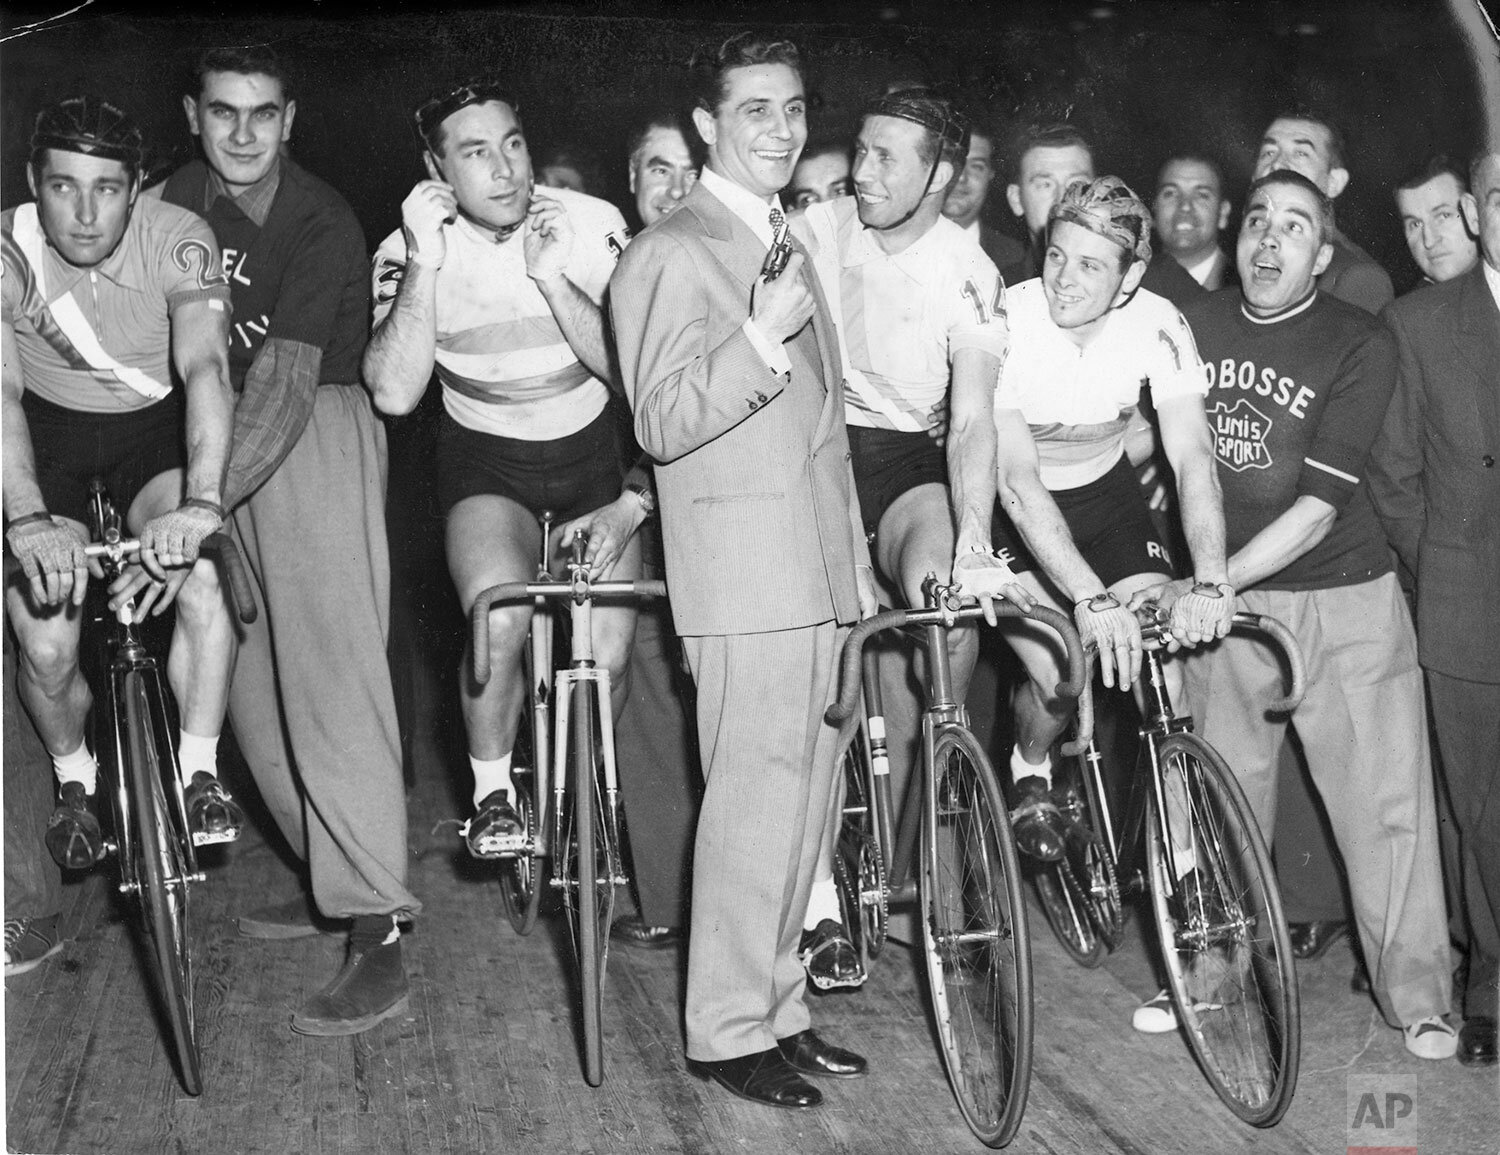  Popular French singer, composer and actor Gilbert Becaud fires off the classic Six Day bicycle race at velodrome d'Hiver of Paris, France, April 2, 1955. From left to right: Raymond Goussot, Georges Senffleben, Gilbert Becaud holding his pistol and 